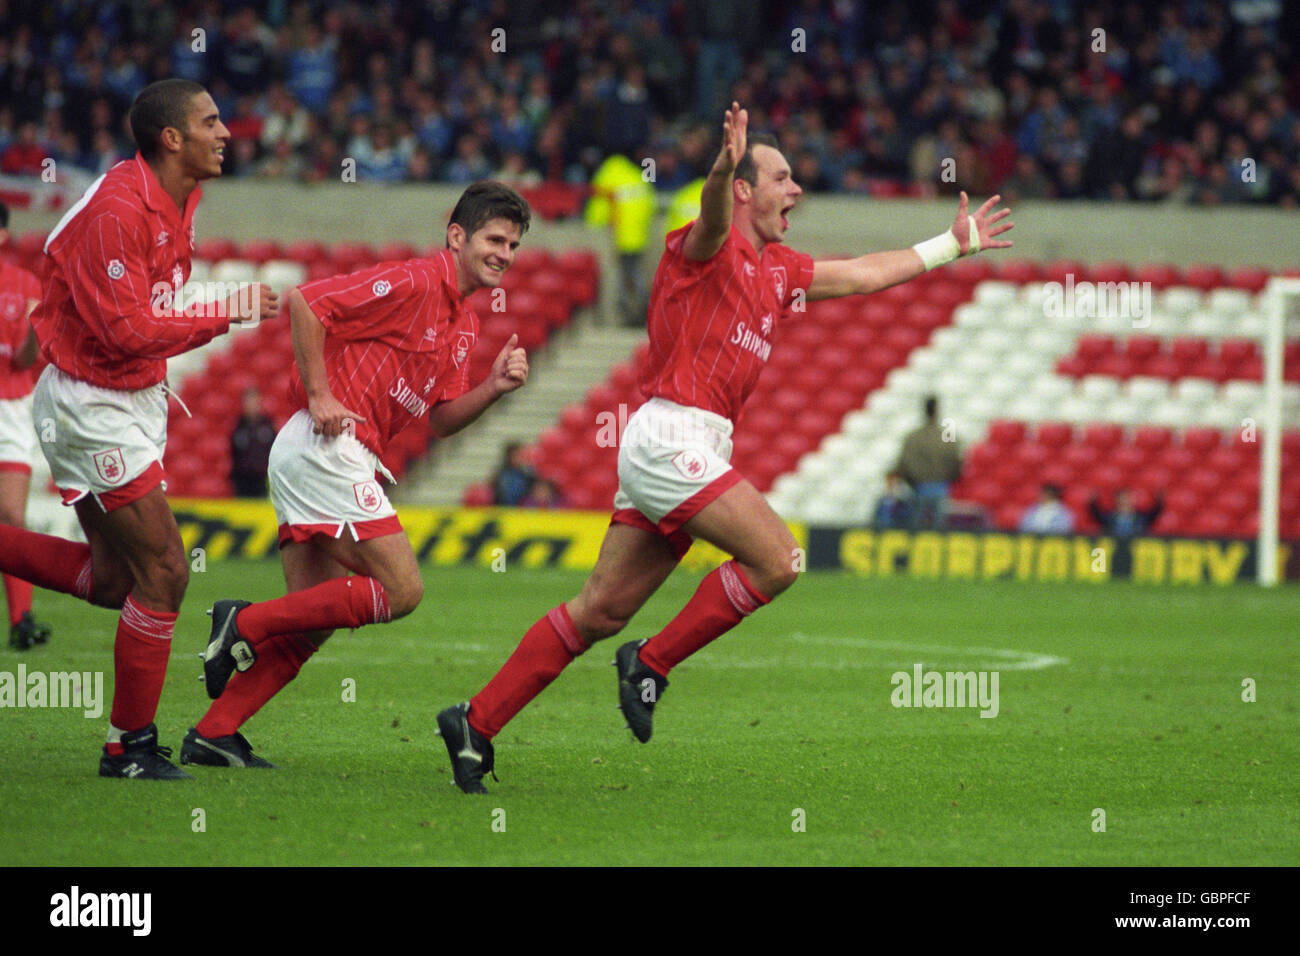 Soccer - Endsleigh League Division One - Nottingham Forest v Portsmouth - City Ground. NOTTINGHAM FOREST'S STEVE STONE CELEBRATES AFTER HIS LAST MINUTE EQUILIZER. Stock Photo